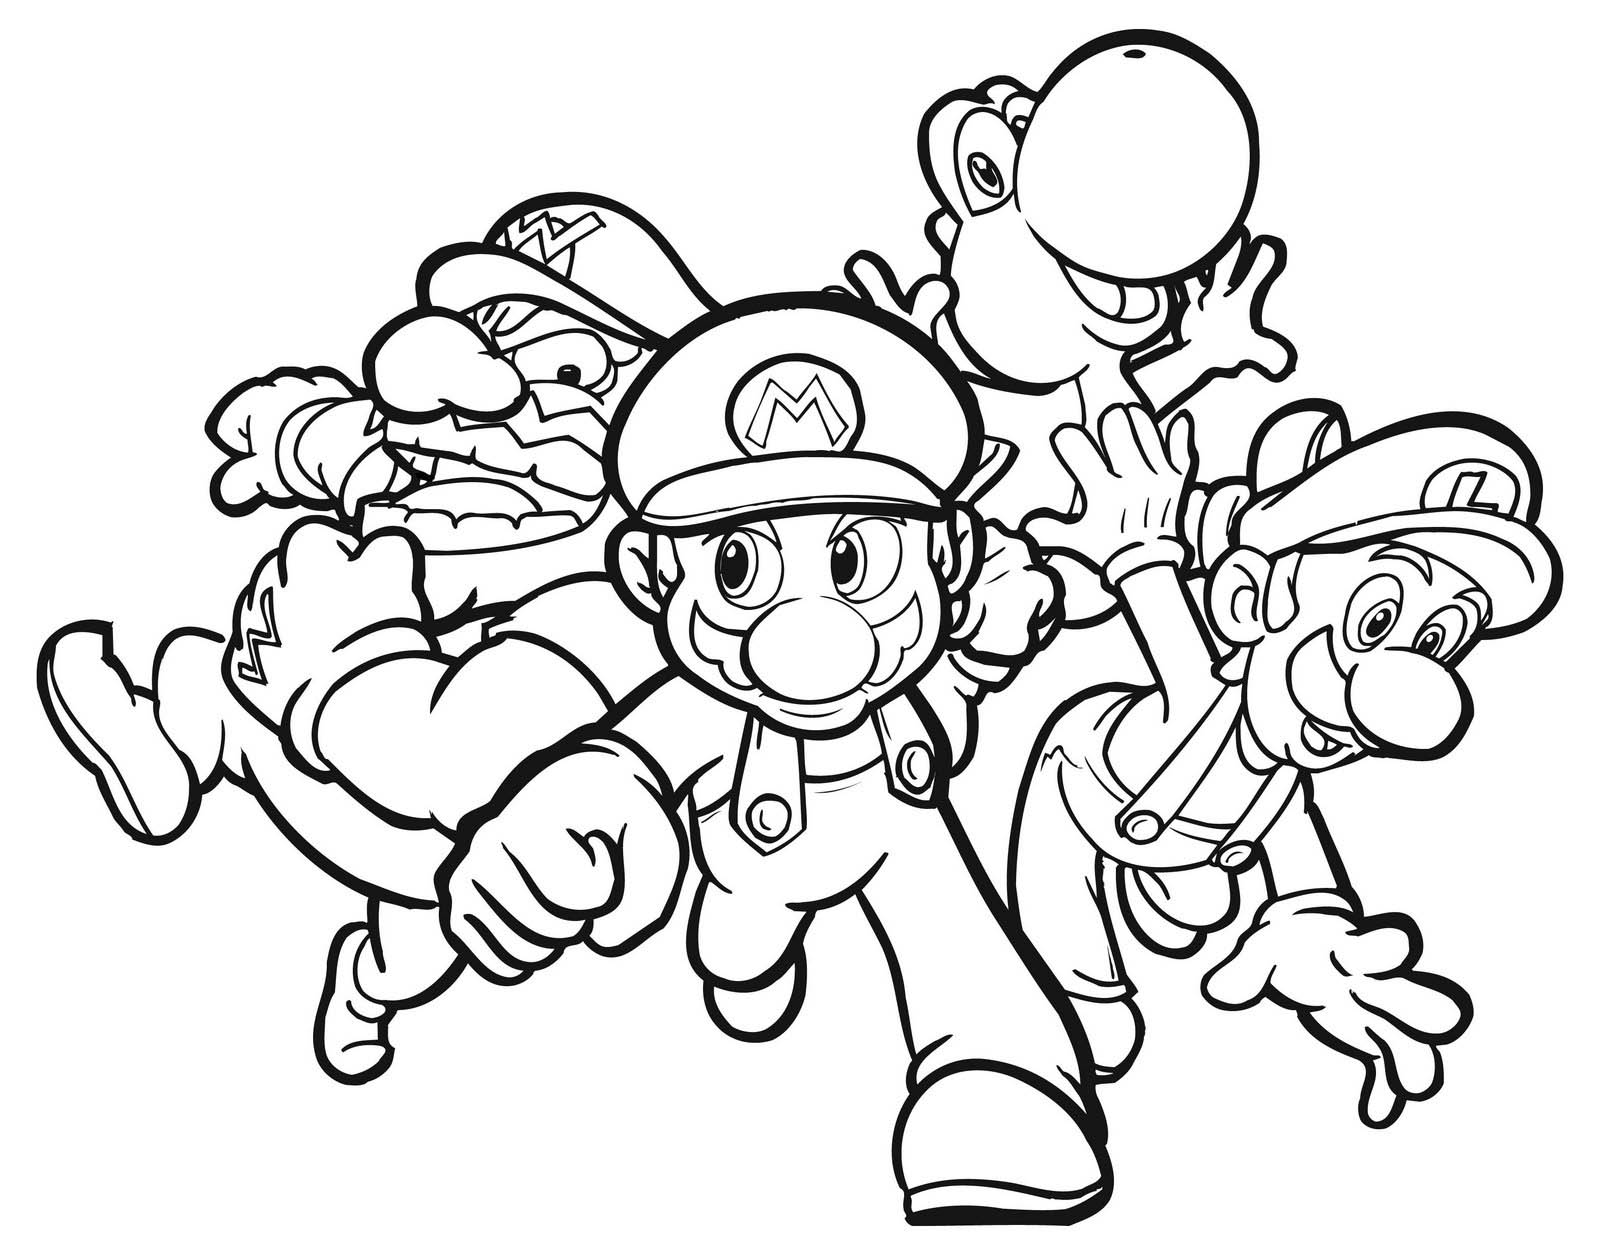 Mario Kart Coloring Pages Best Coloring Pages For Kids